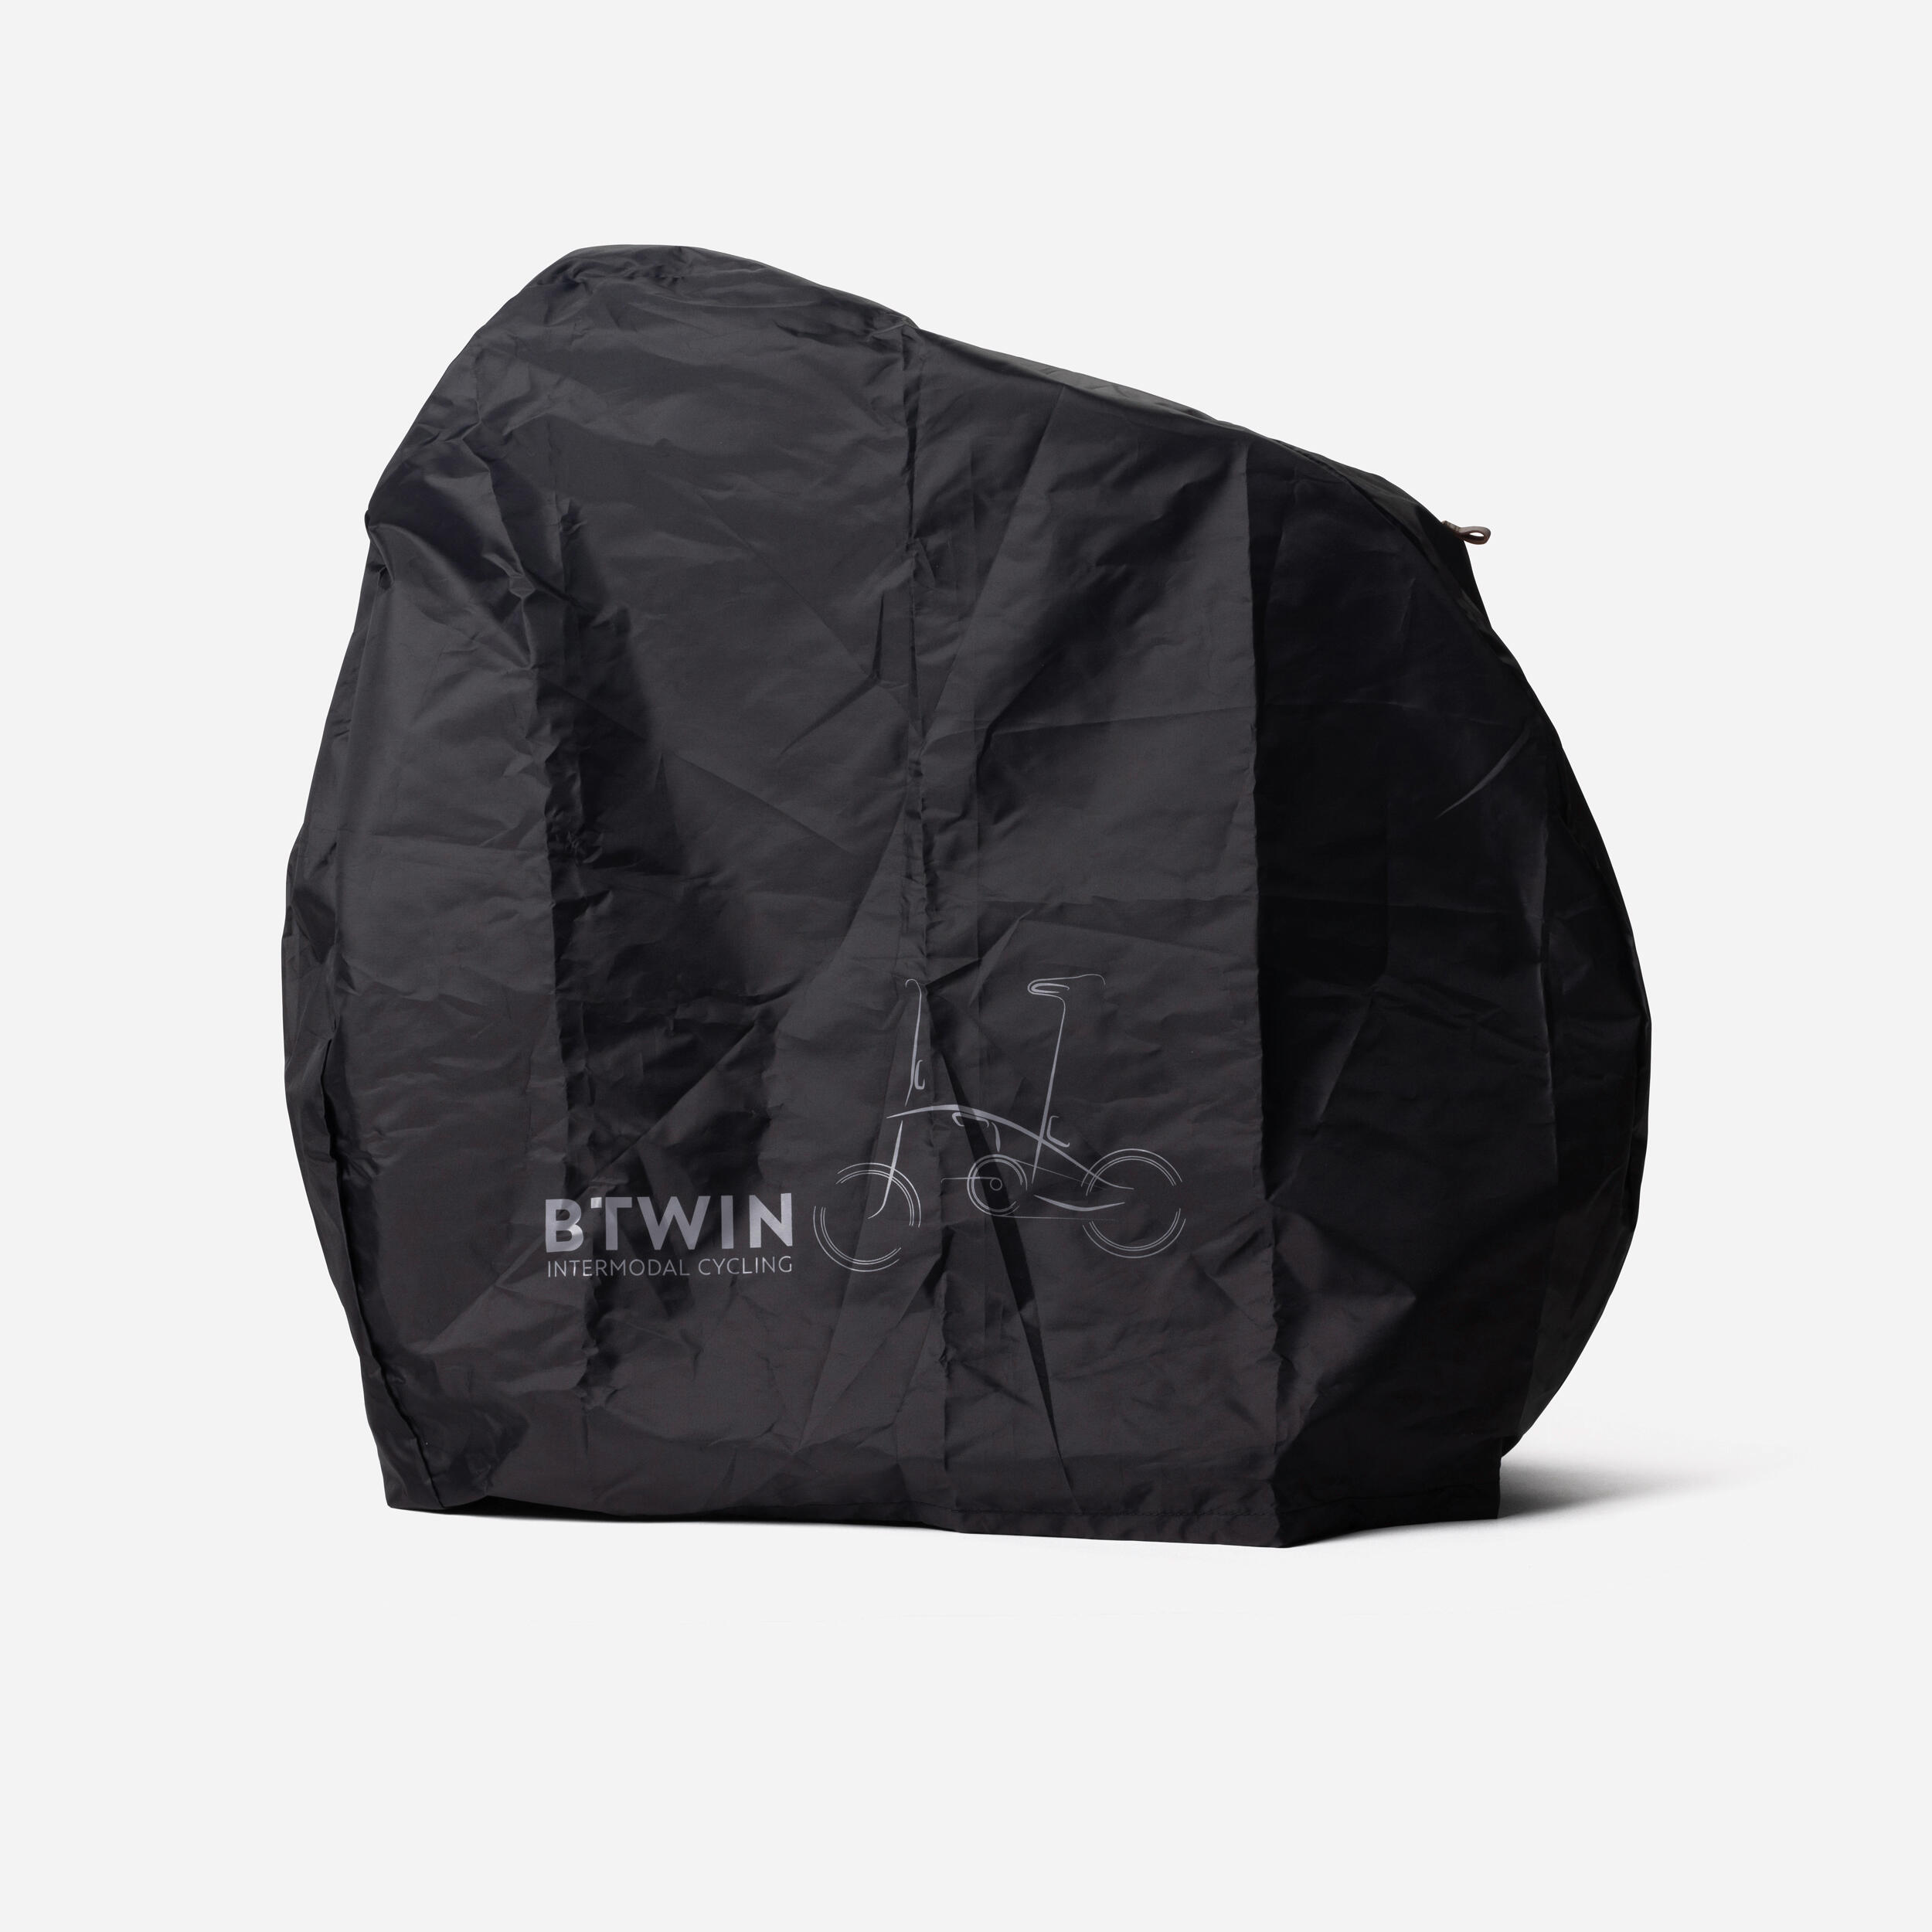 BTWIN Protective Cover + Bag for 16" Folding Bikes